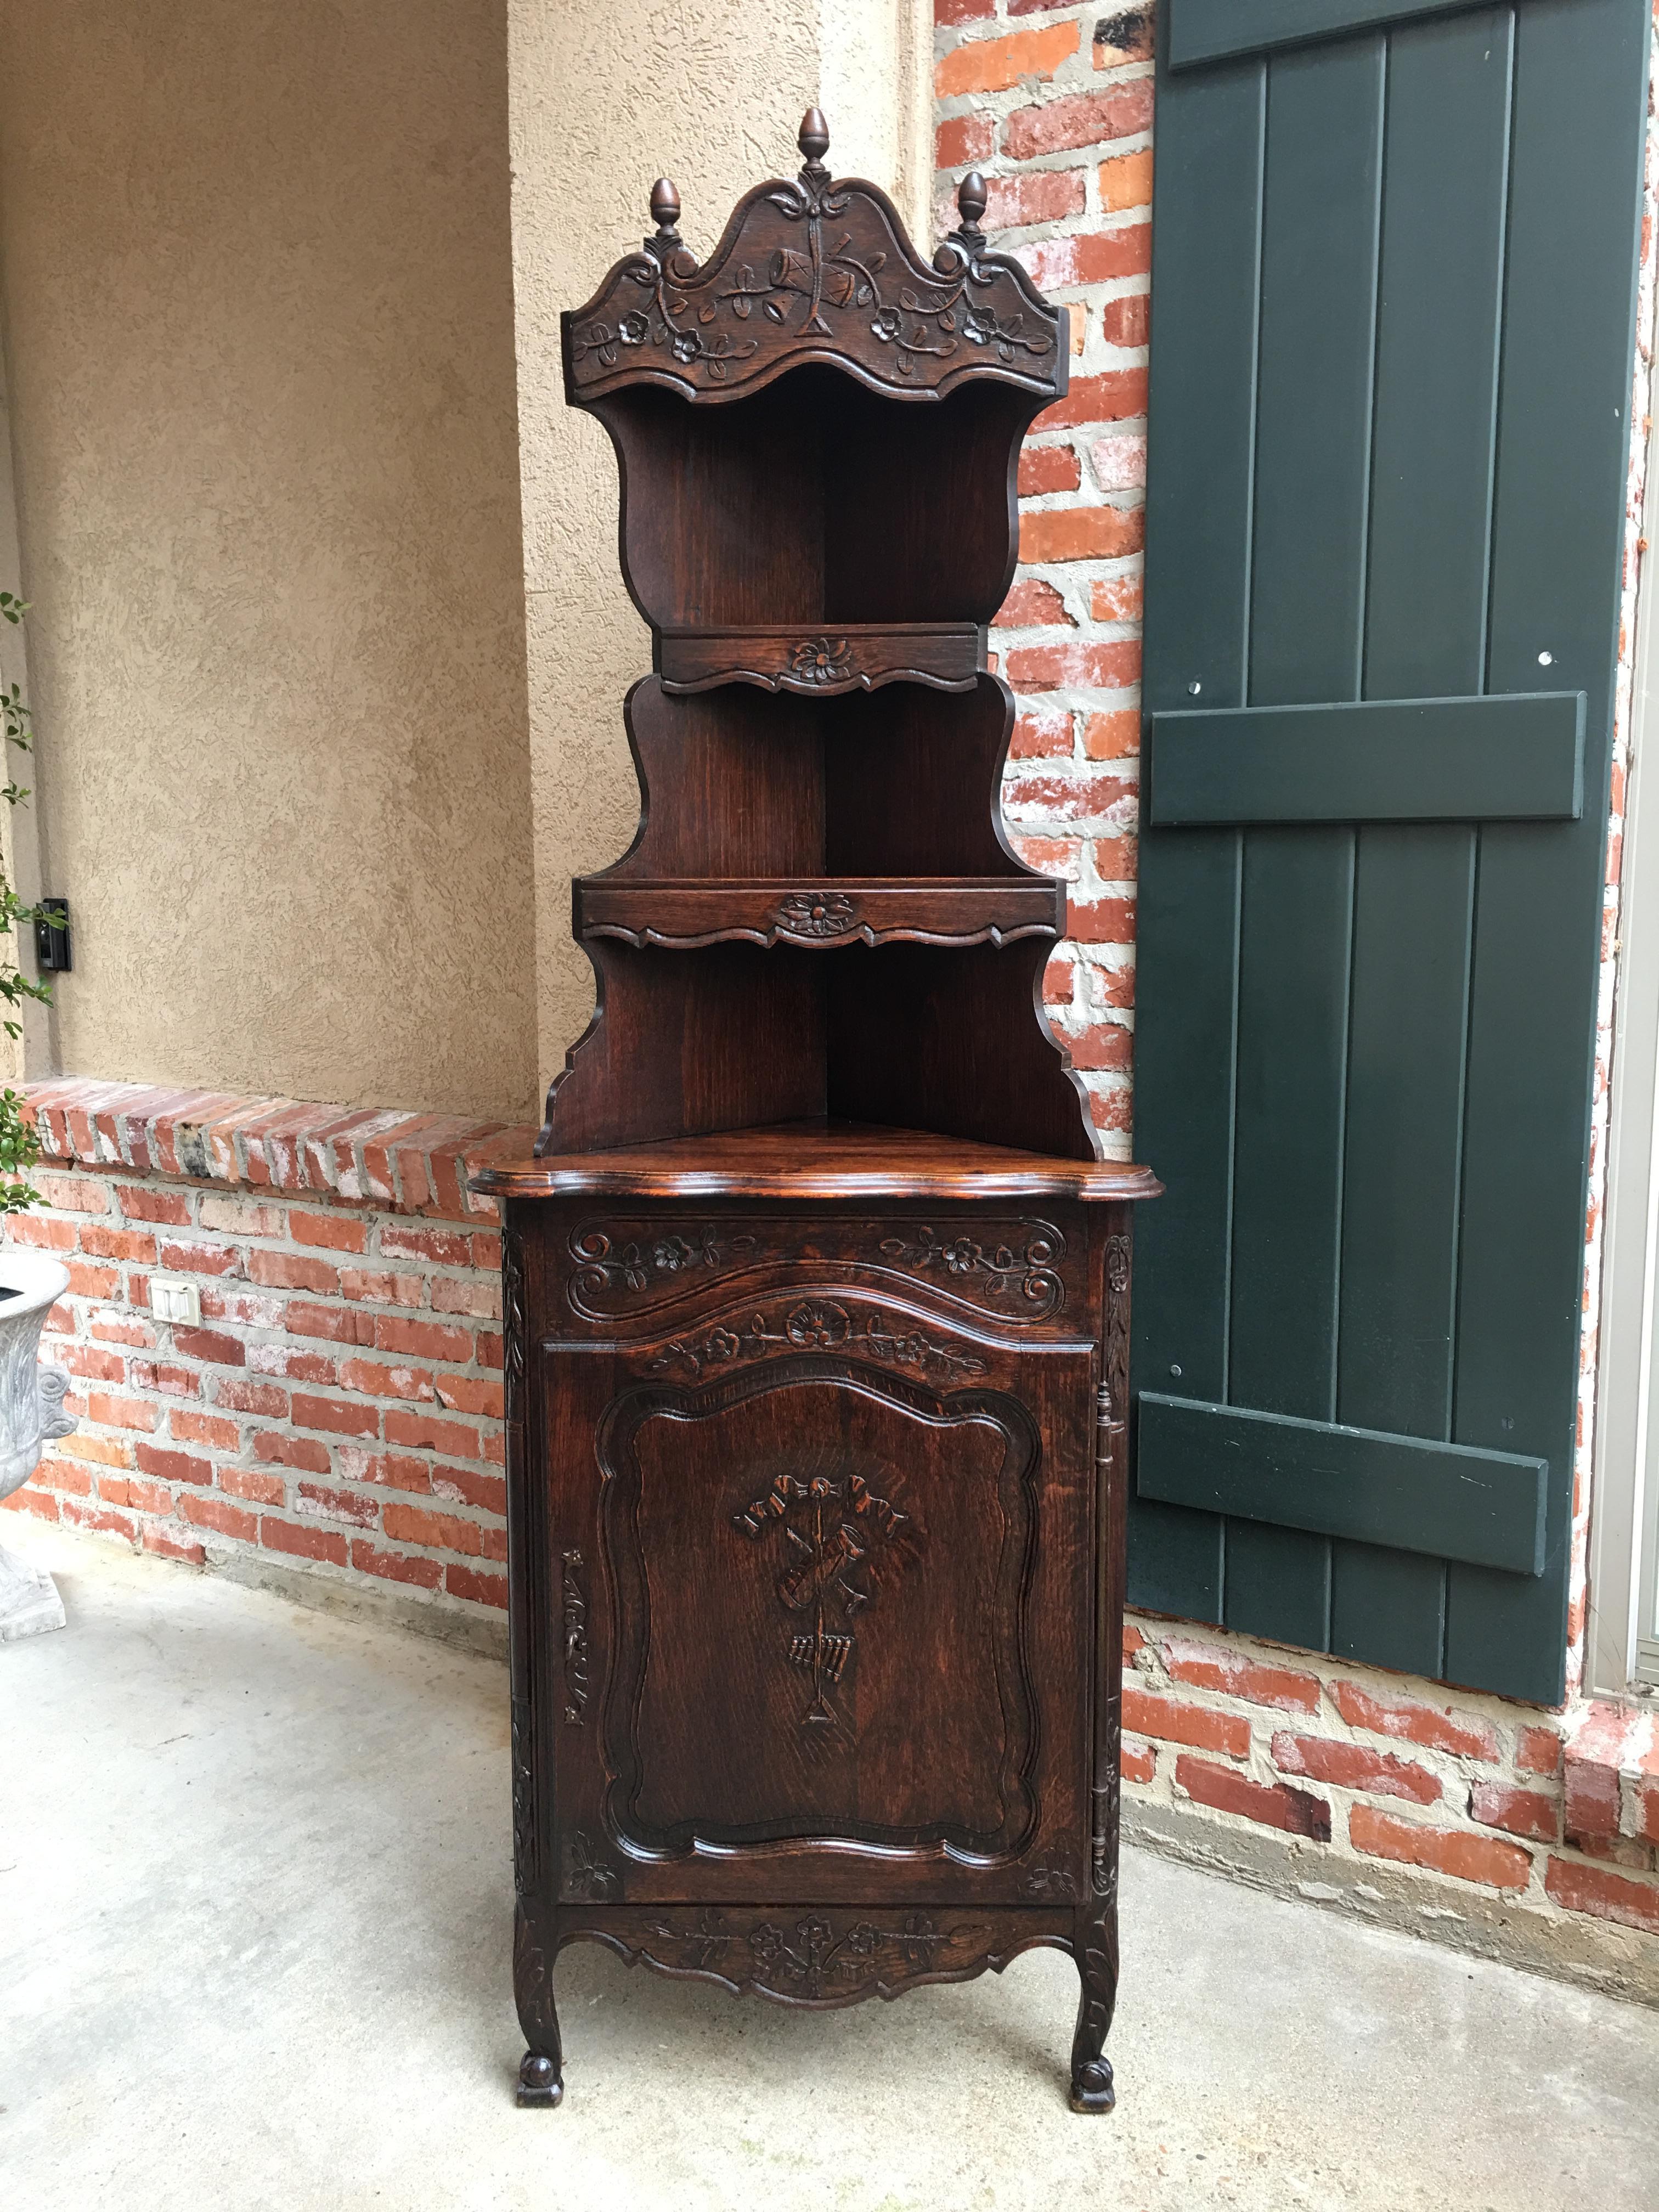 French Provincial 19th Century Antique French Carved Dark Oak Corner Cabinet Shelf Bookcase